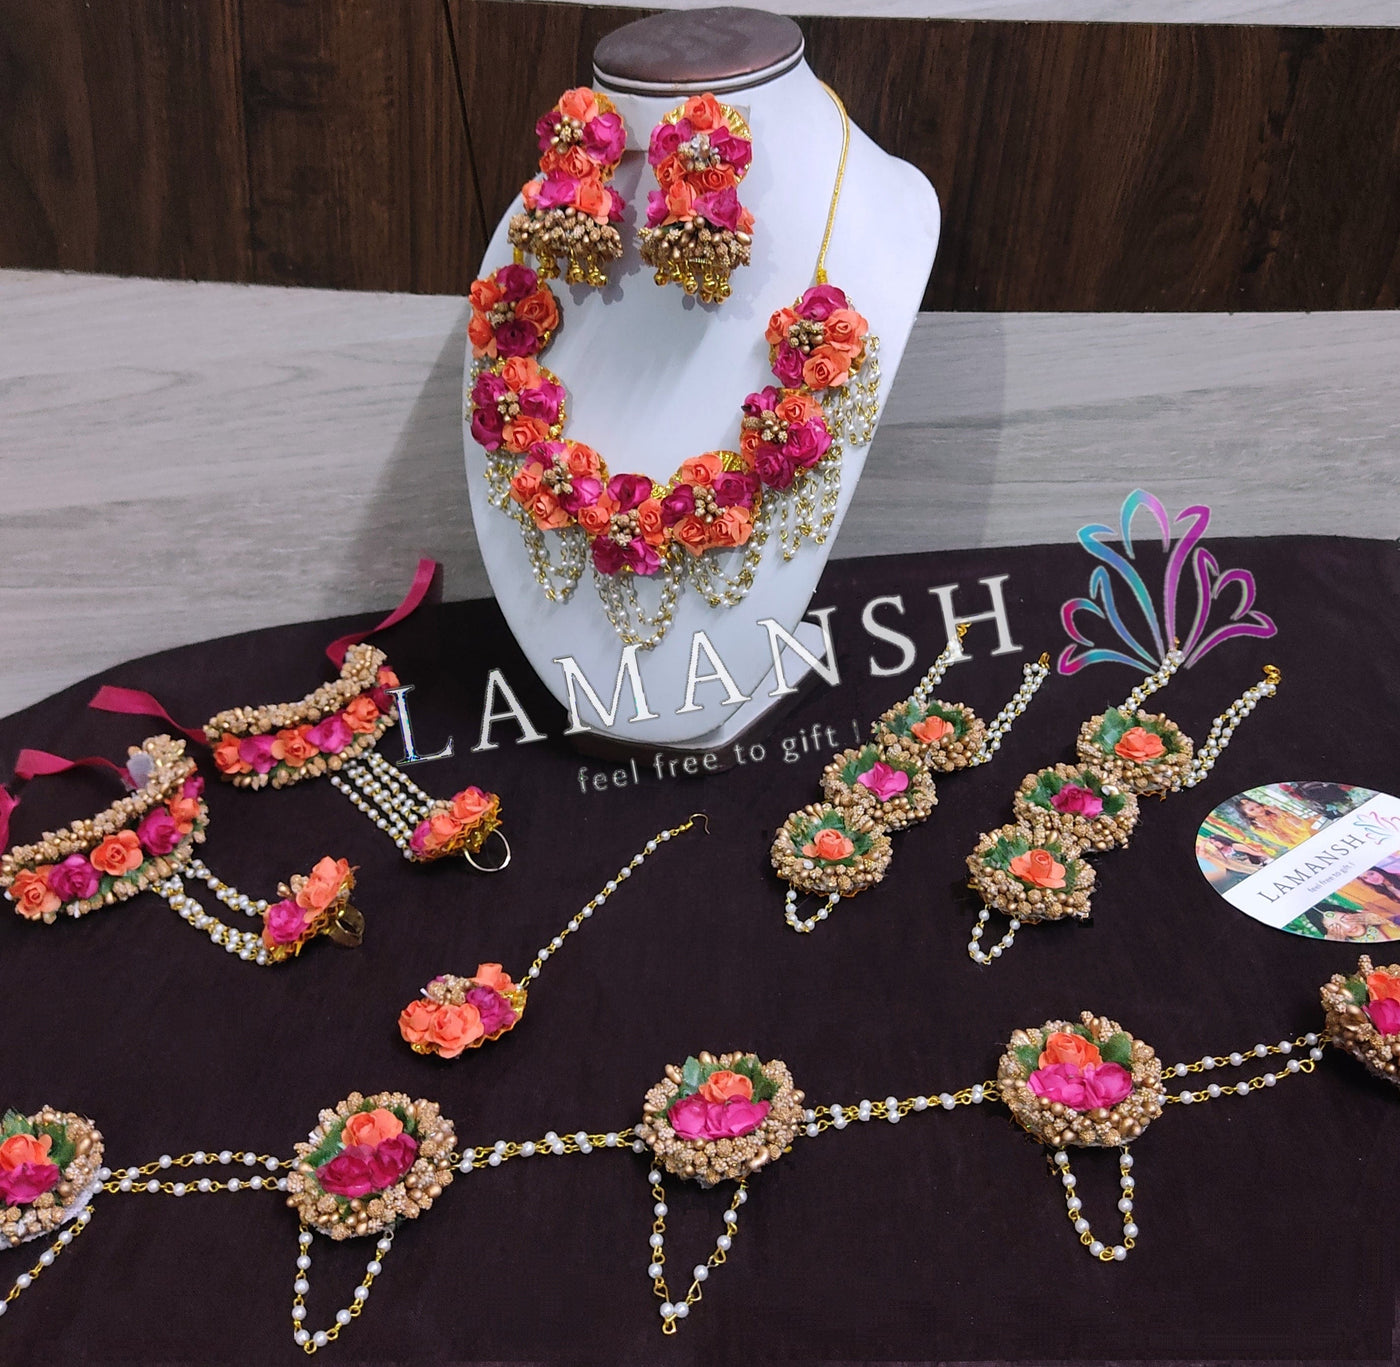 Lamansh Baby 👶shower jewelry 1 Necklace, 2 Jhumki Earrings ,1 Maangtika , 1 Kamarbandh , 2 Anklets & 2 Bracelet attached with ring / Pink Orange Gold LAMANSH® Baby Shower Collection Floral 🌸 Jewellery Set with Jhumki earrings & Anklets for Women & Girls